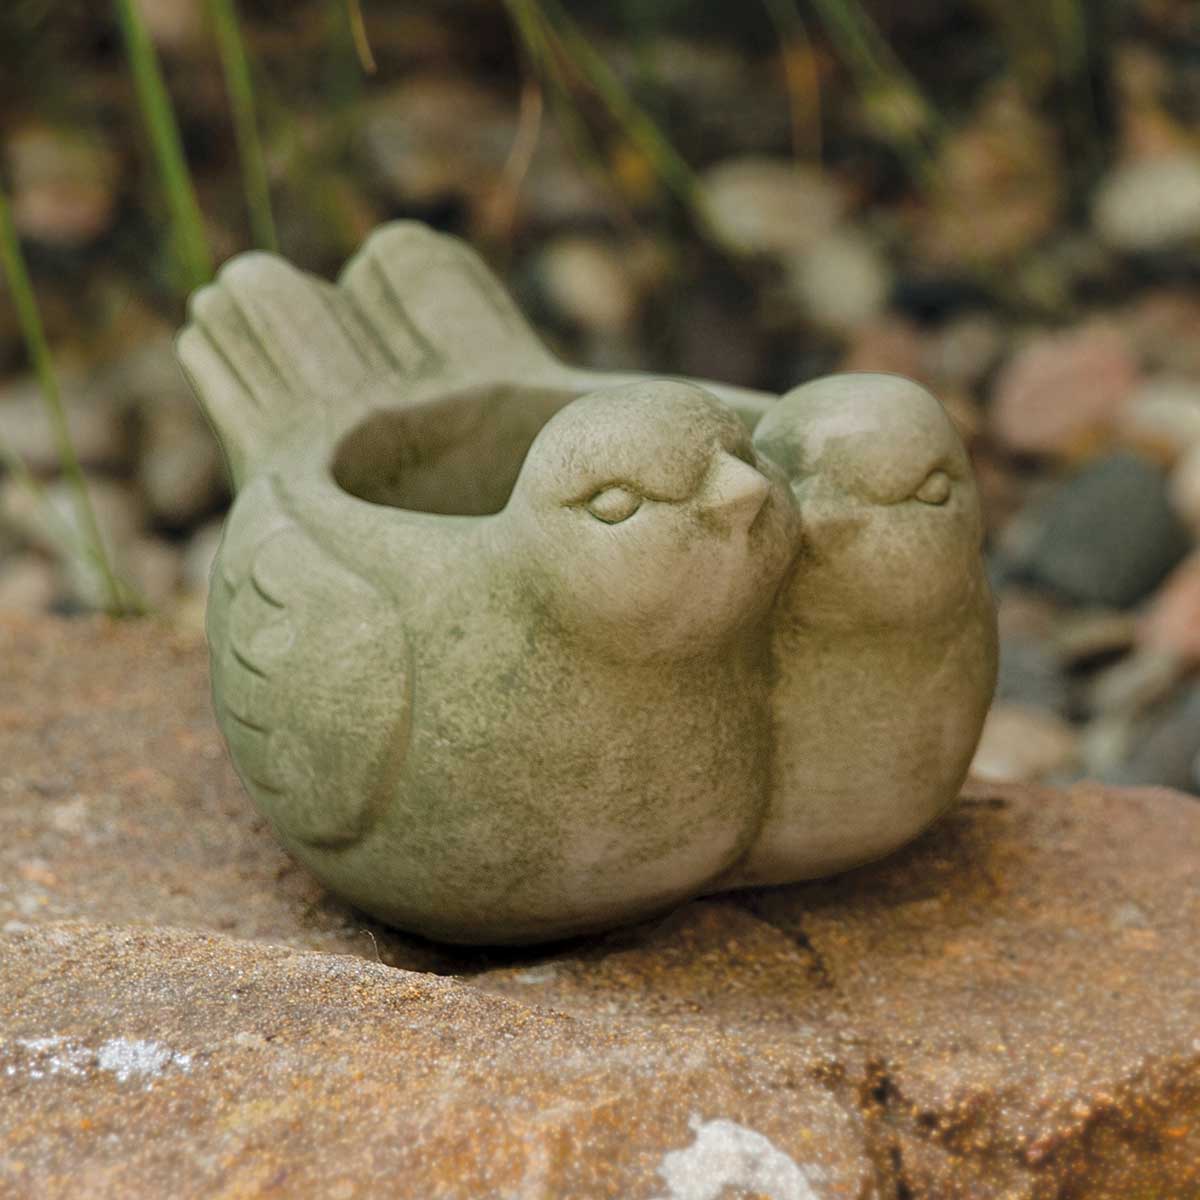 POT DOUBLE BIRD VERDE 7IN X 6.25IN X 4.5IN CONCRETE - Click Image to Close